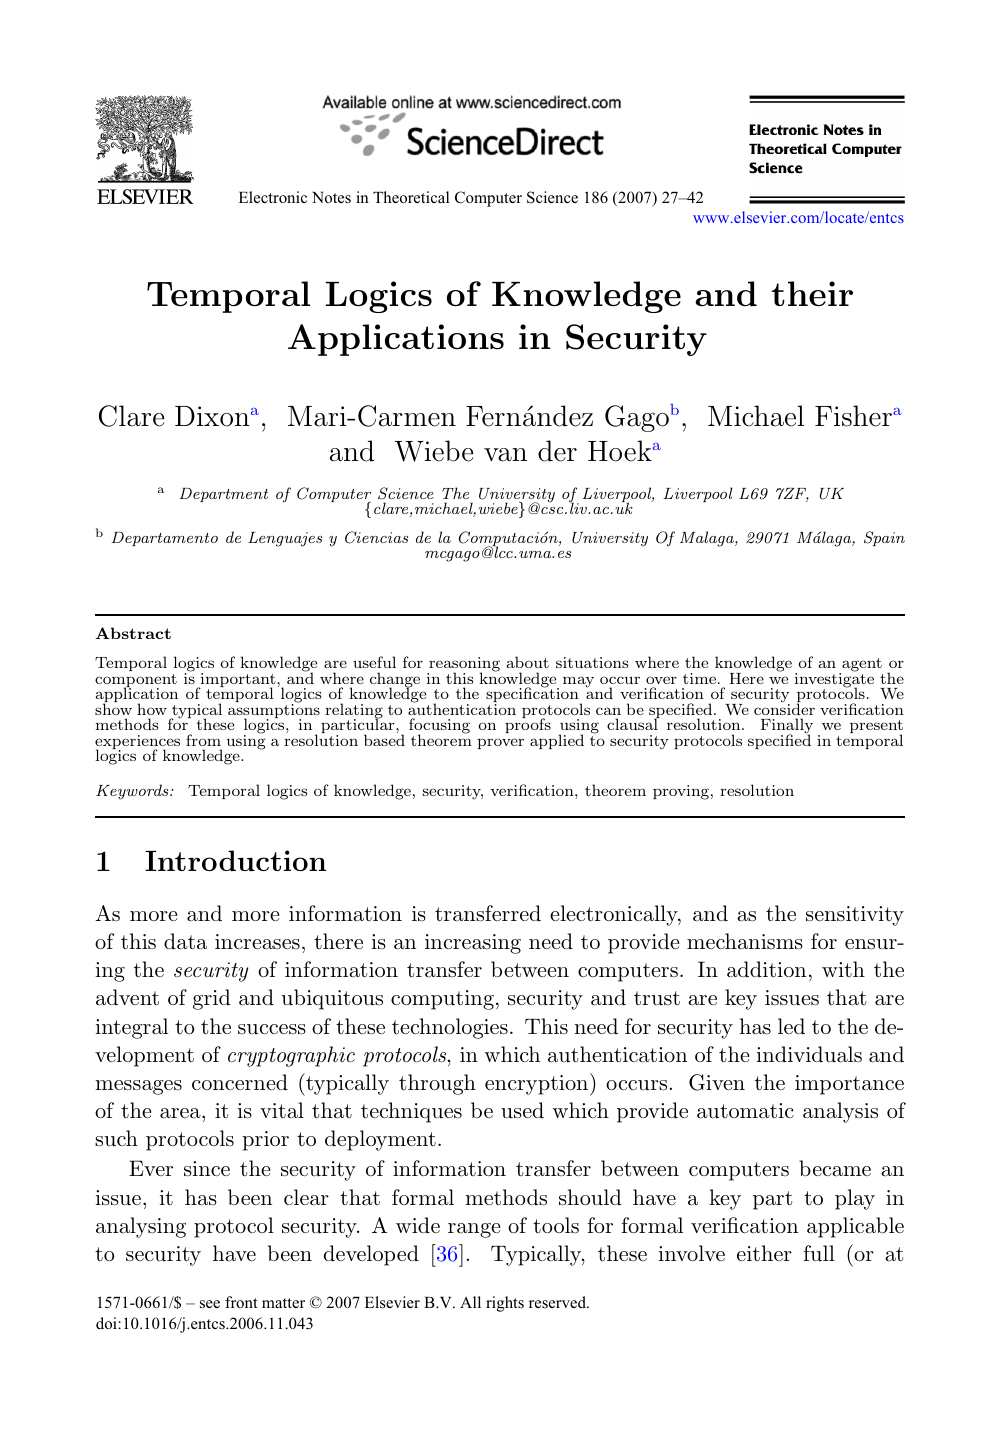 Temporal Logics Of Knowledge And Their Applications In Security Topic Of Research Paper In Computer And Information Sciences Download Scholarly Article Pdf And Read For Free On Cyberleninka Open Science Hub